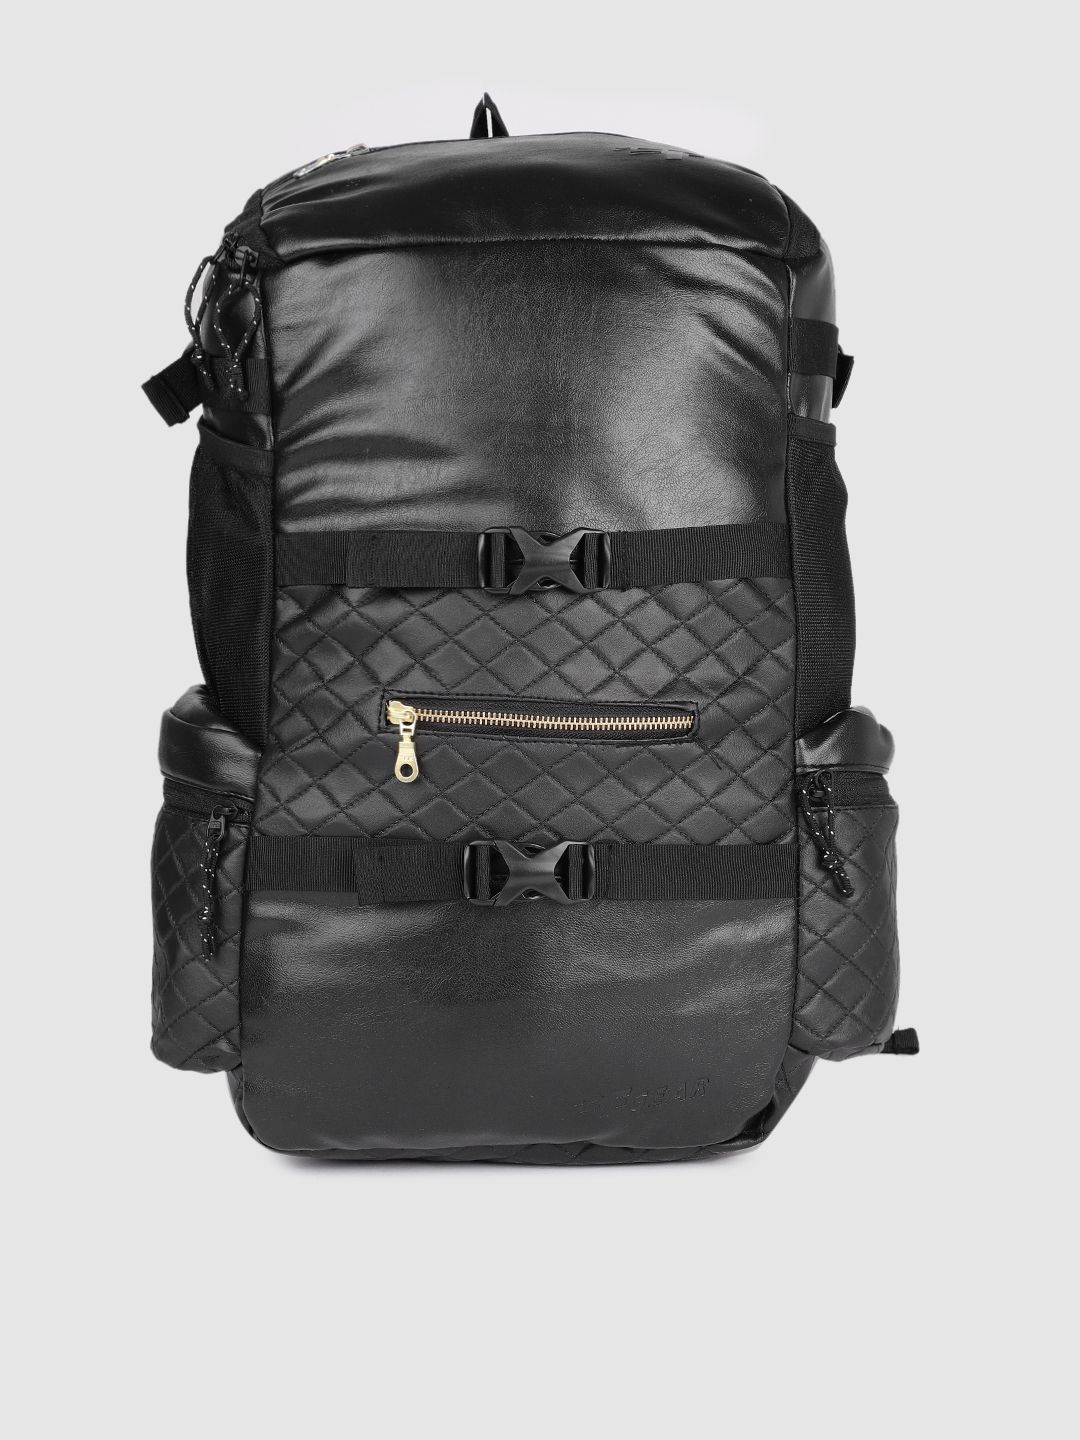 F Gear Unisex Black Solid Backpack Price in India